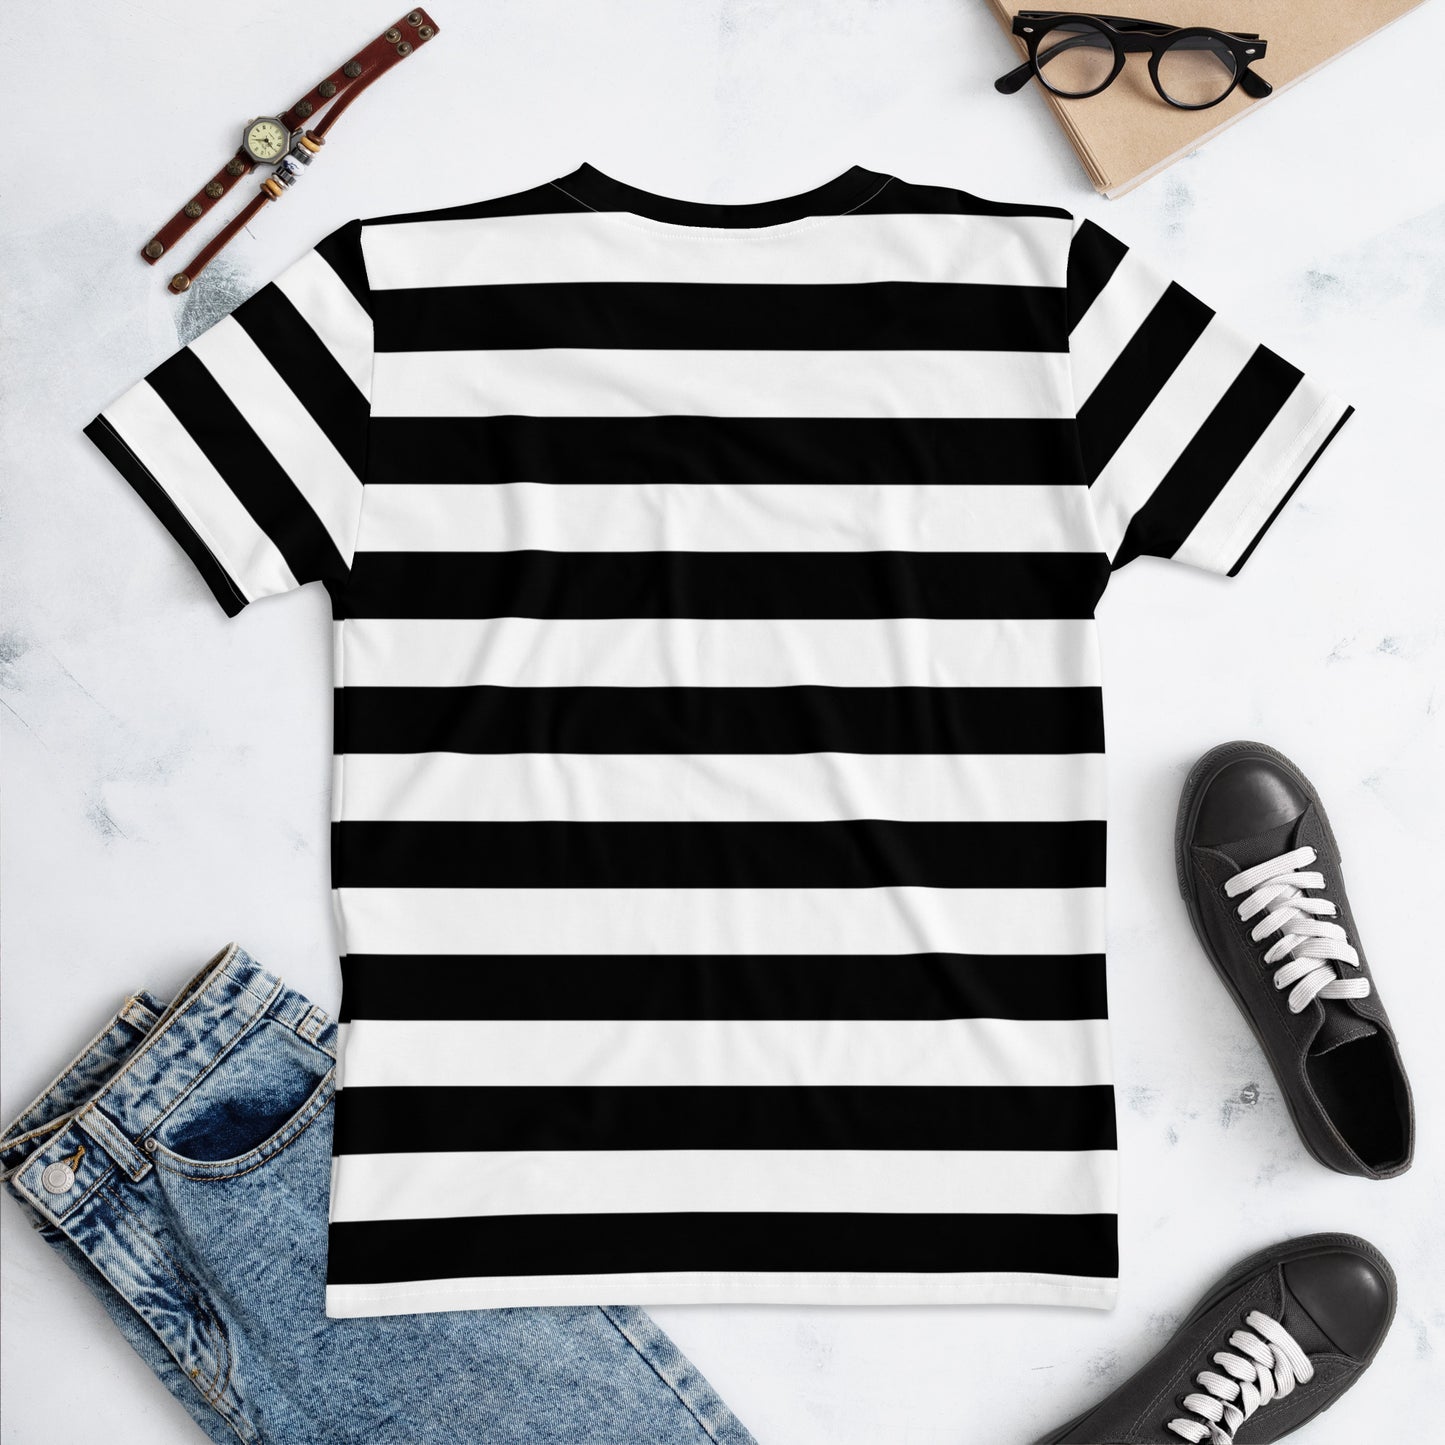 Black and White Striped Women Tshirt, Vintage Retro Designer Adult Graphic Aesthetic Fashion Fitted Crewneck Tee Shirt Top Starcove Fashion